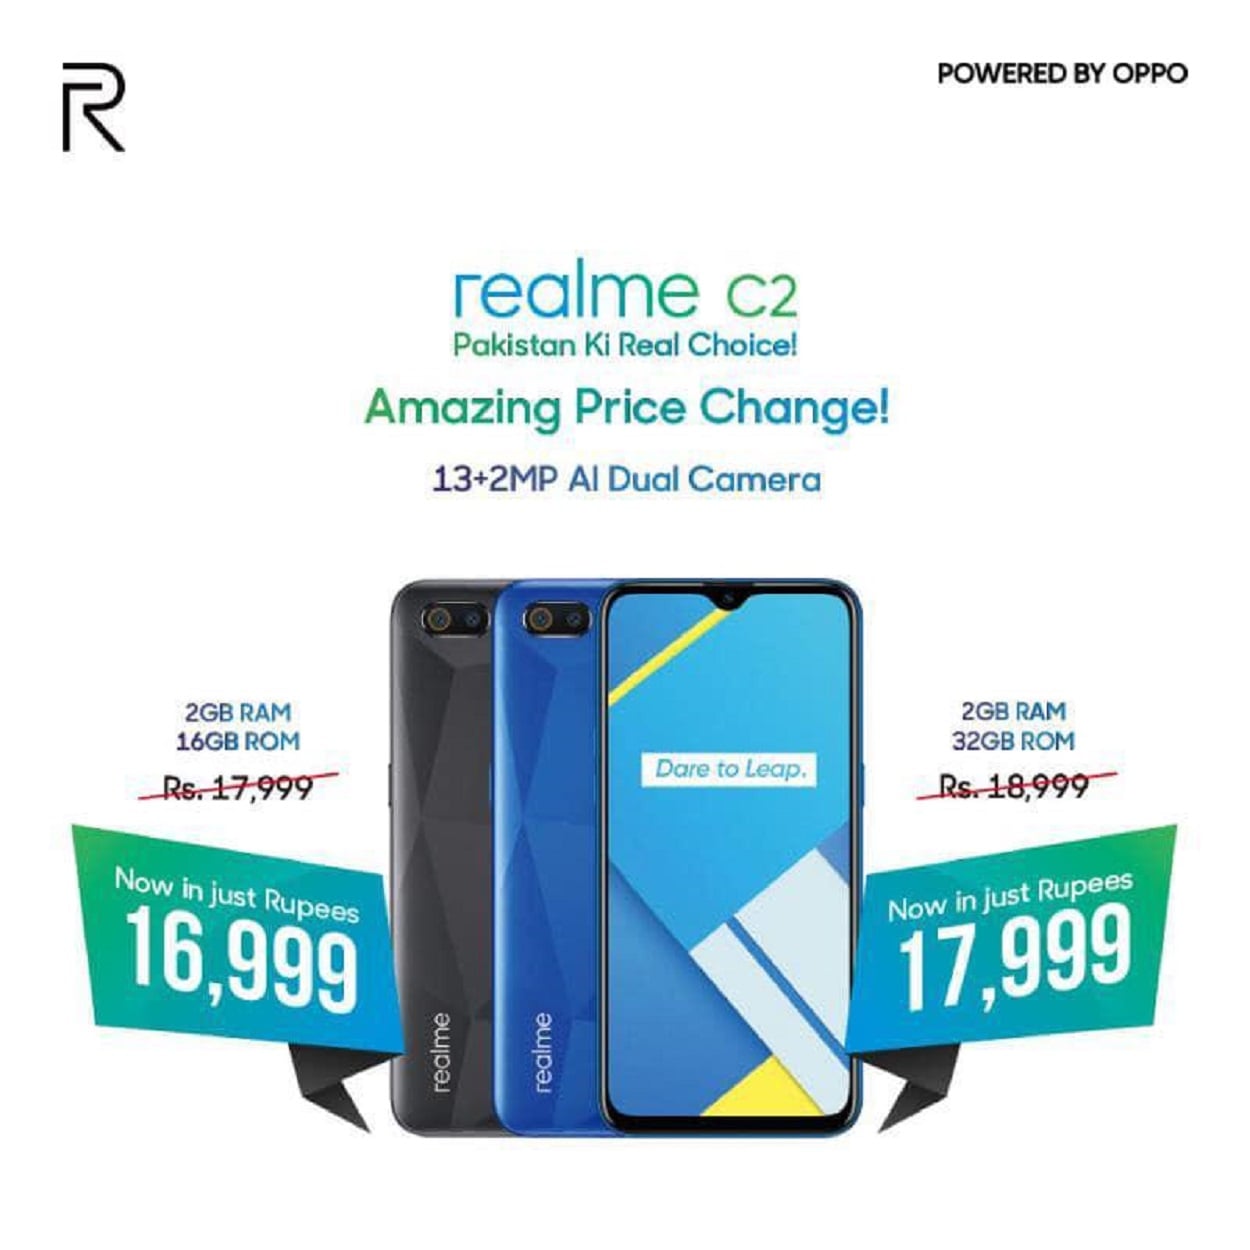 realme announces, exciting discount offer on youth’s favorite entry- level king realme C2 smartphone